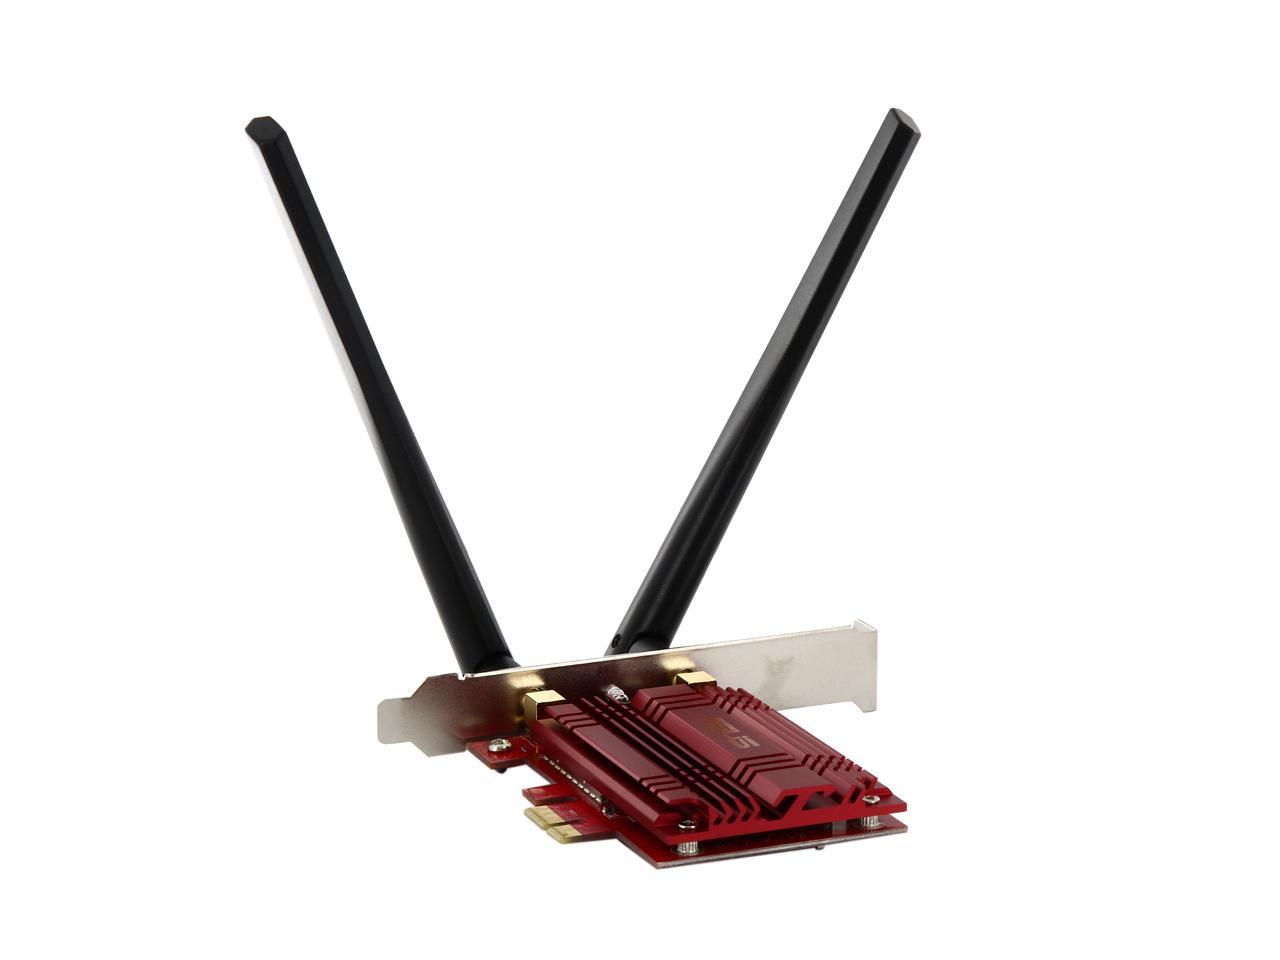 broadcom 802.11n network adapter 5ghz compatible